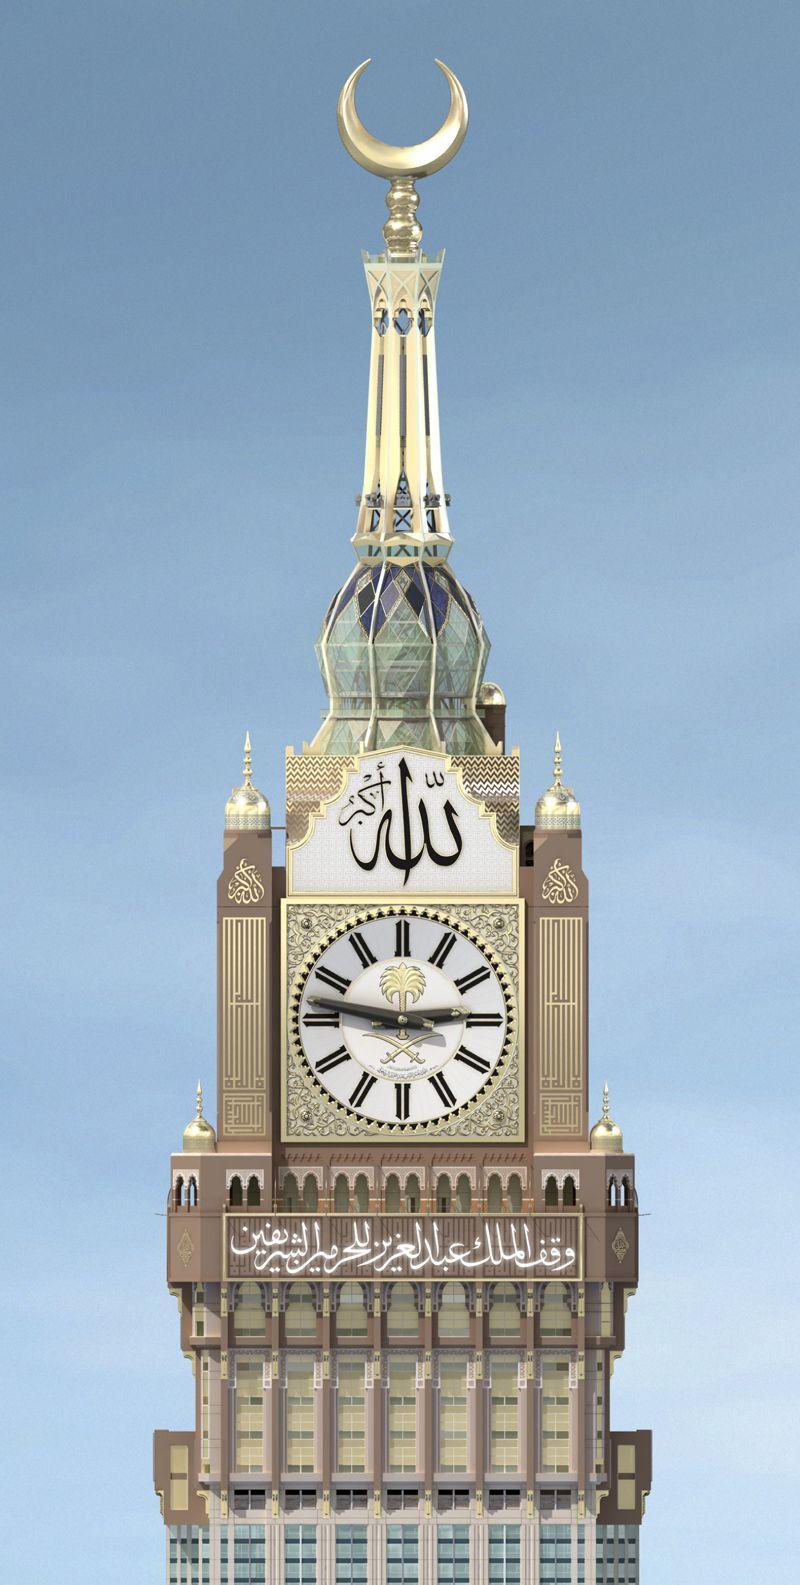 download the royal clock tower